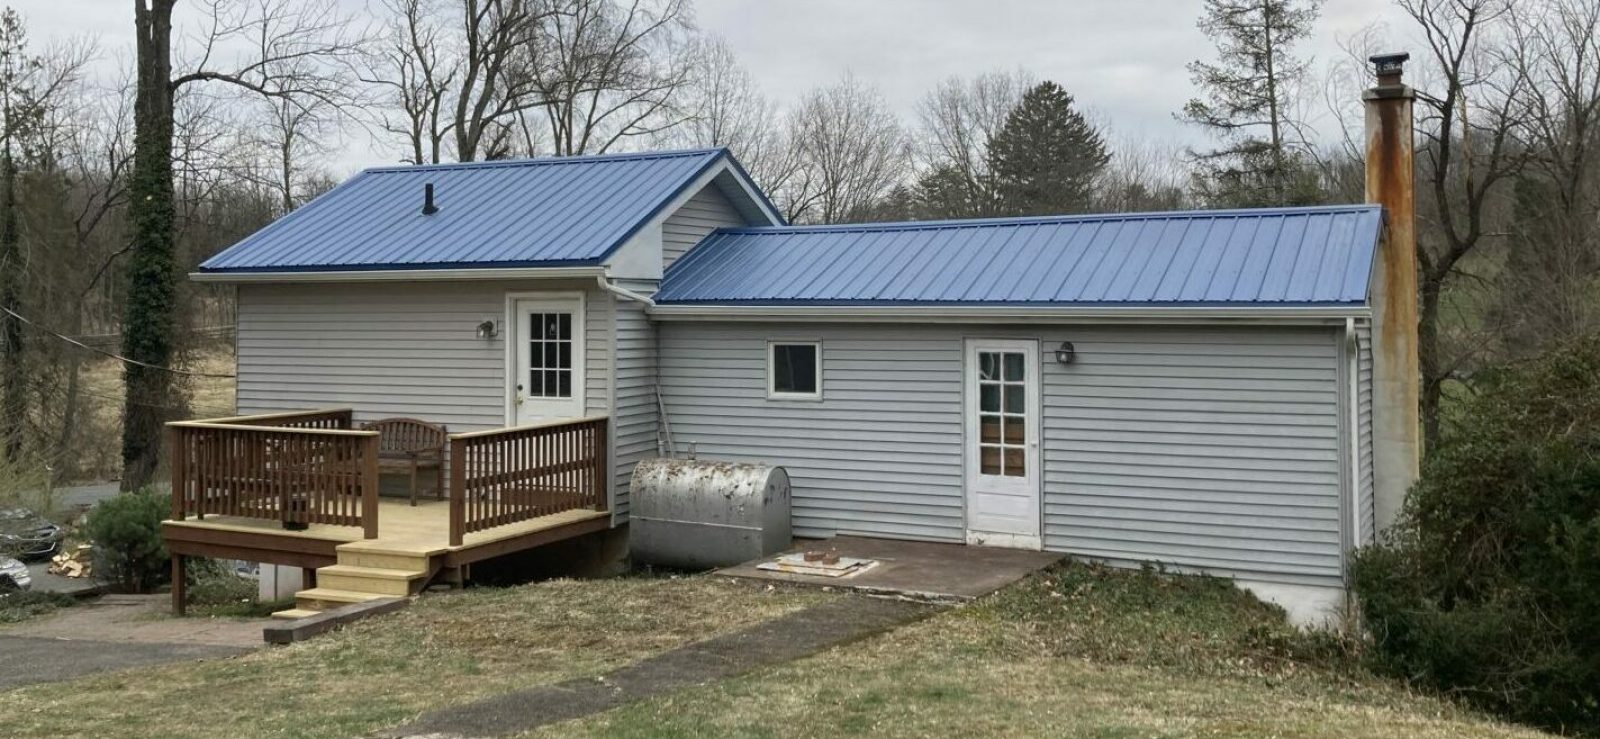 ABM corrugated metal, & Black vinyl shutters, Color: Textured Gallery Blue, Gilbertsville, PA, Montgomery Co., PA, Installed April 2022